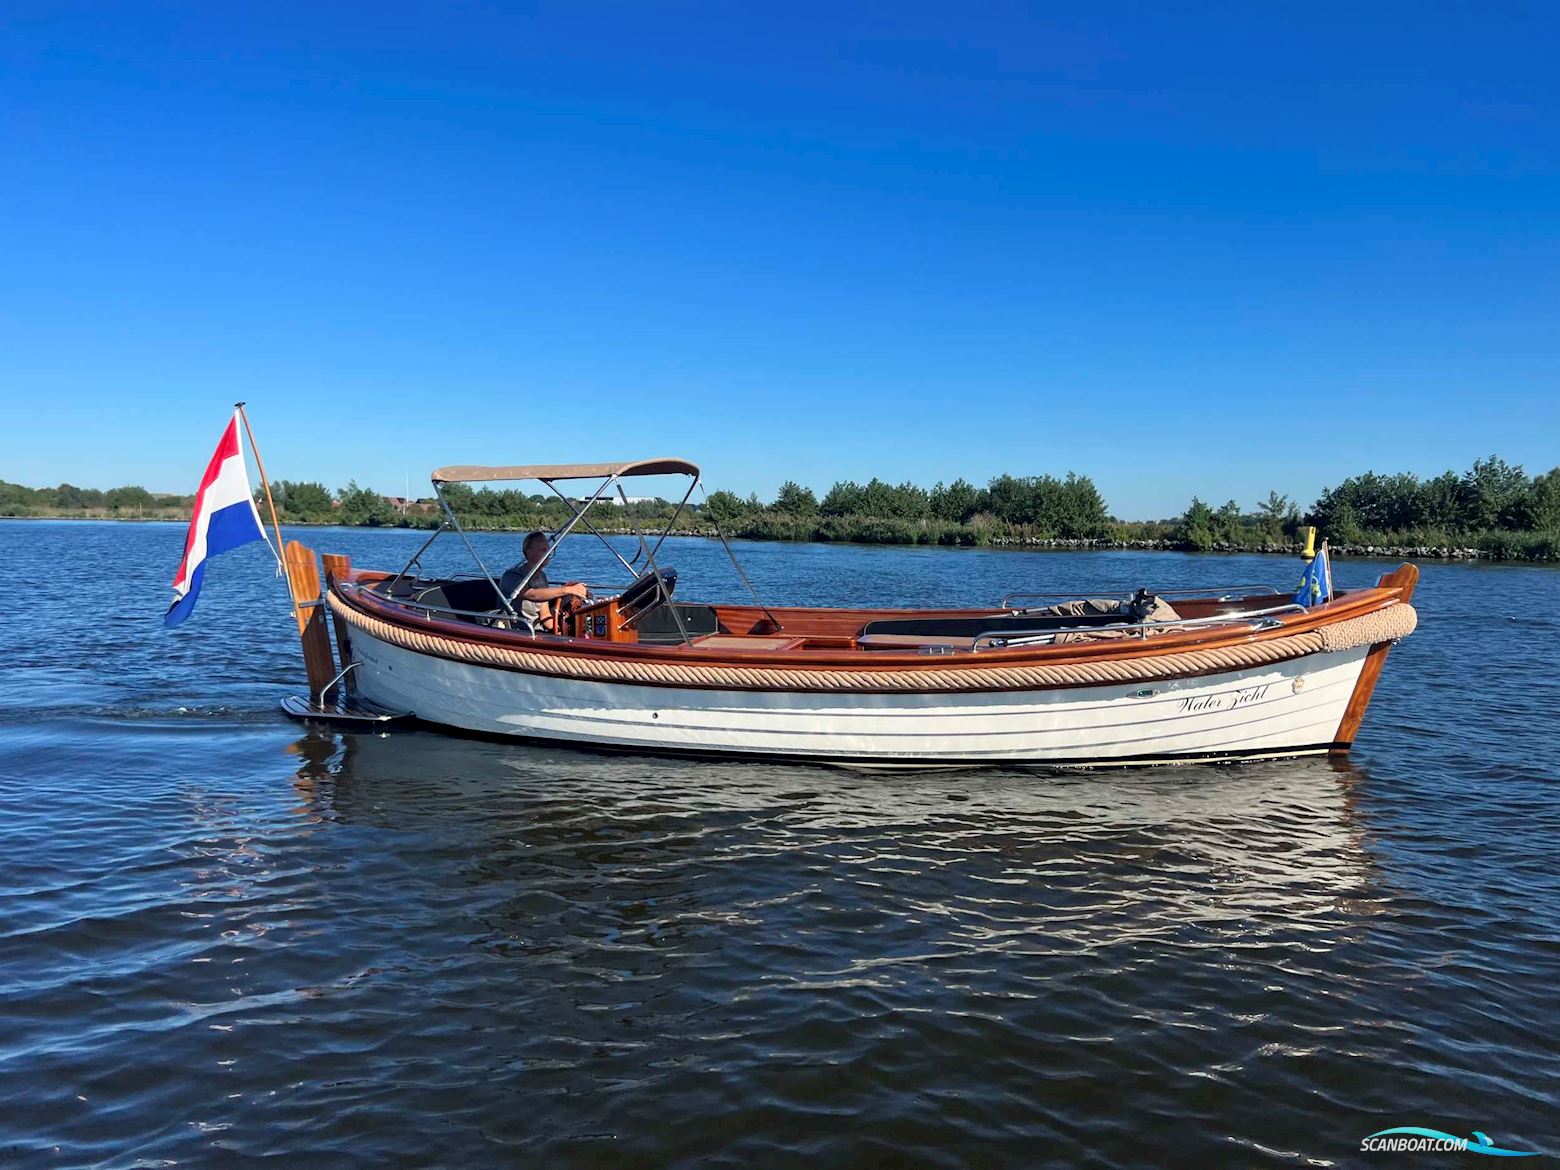 Wester-Engh 8.10 Offshore Motor boat 2002, with Volvo Penta engine, The Netherlands